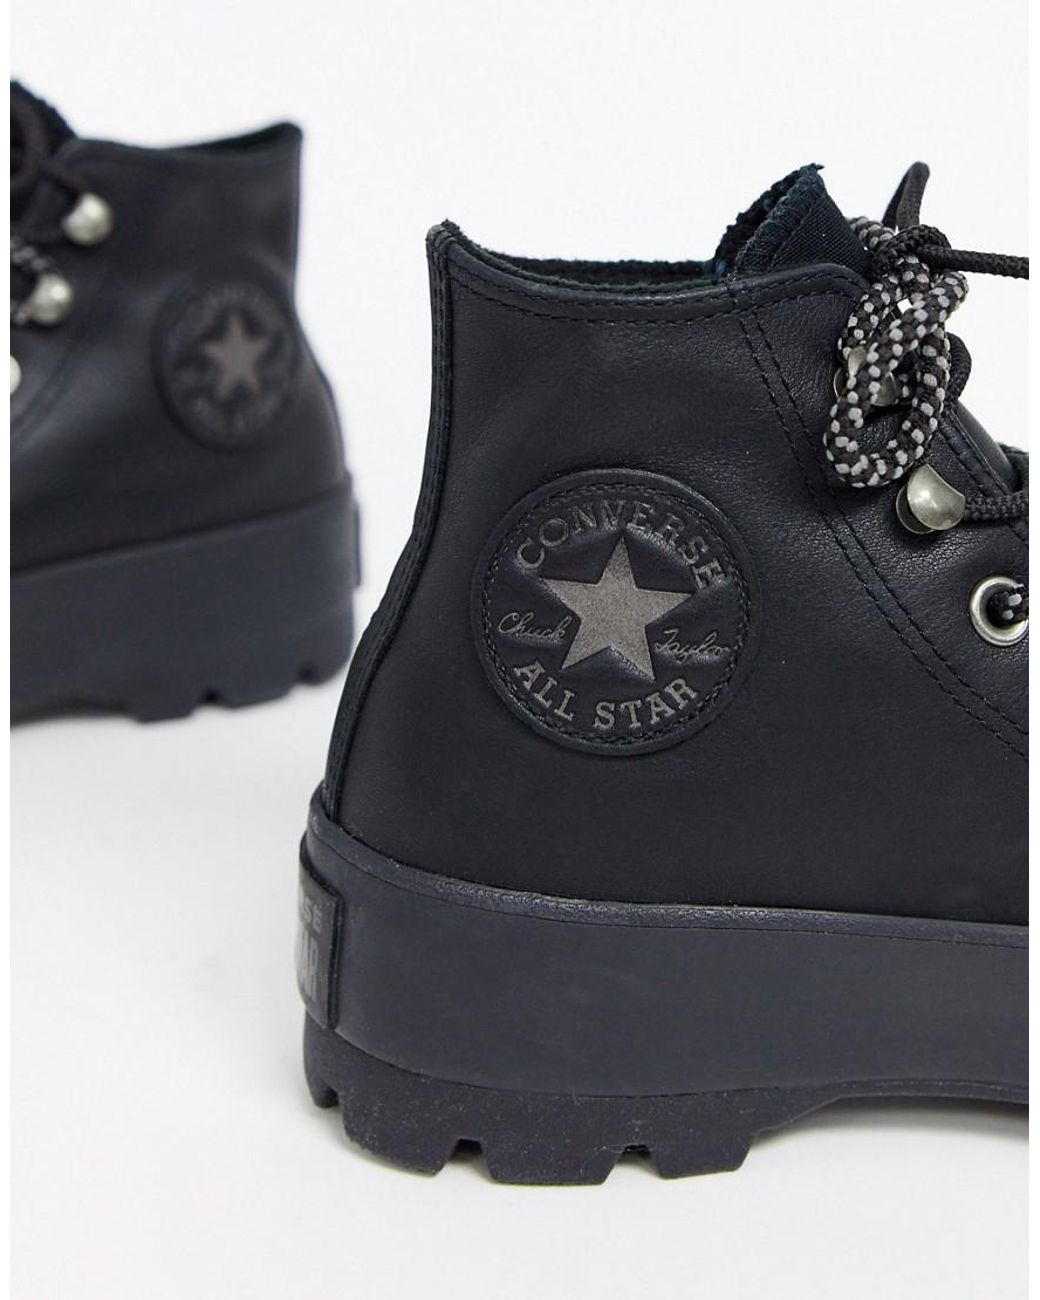 Converse Goretex Leather Chuck Taylor Hi Chunky Sole Hiker Boots in Black |  Lyst